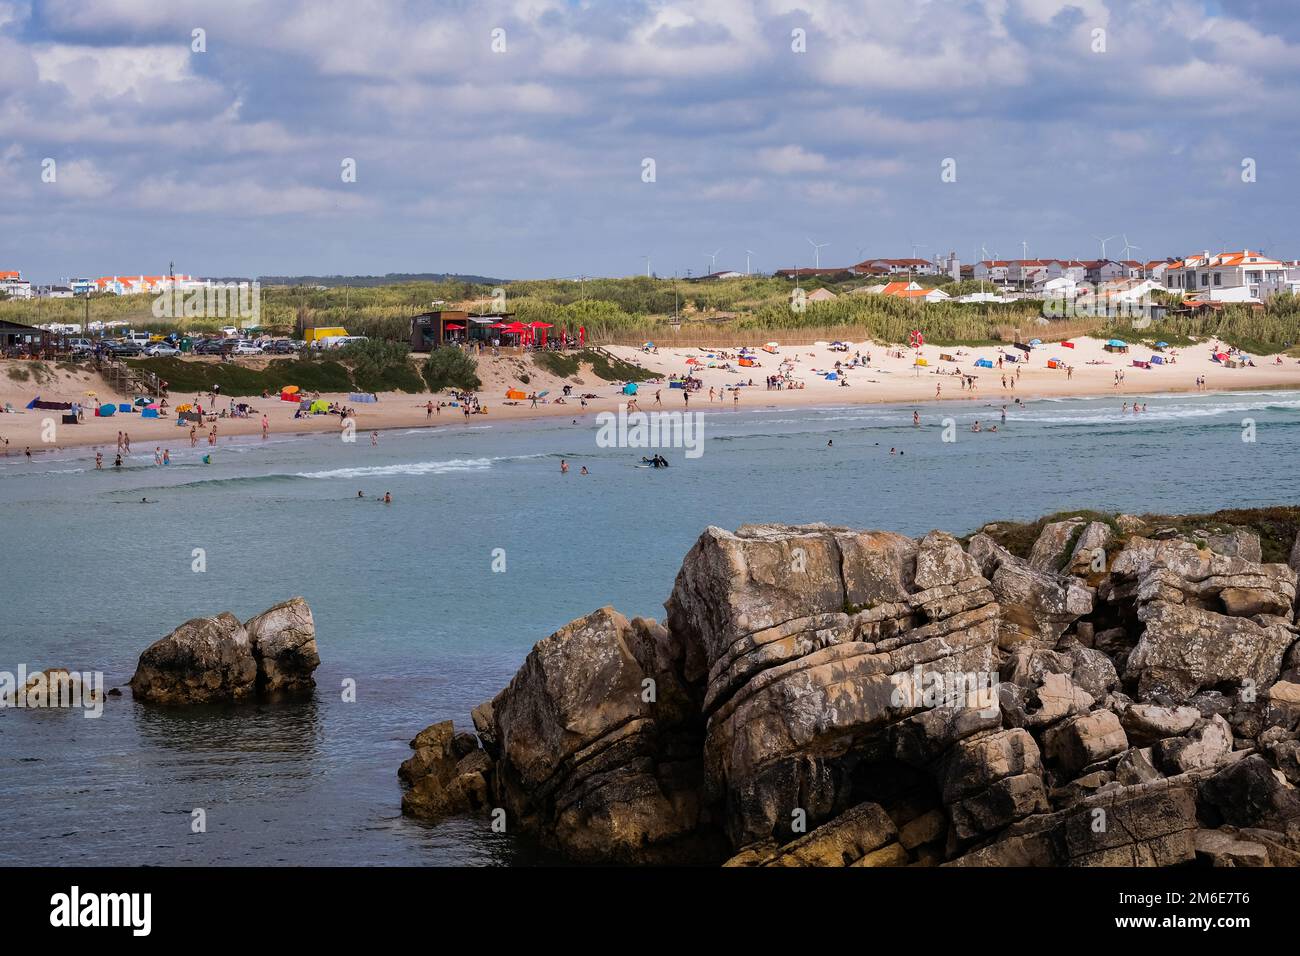 People Enjoying the Nice Weather in the Beach - Summer Day in Baleal (Peniche), Portugal Stock Photo